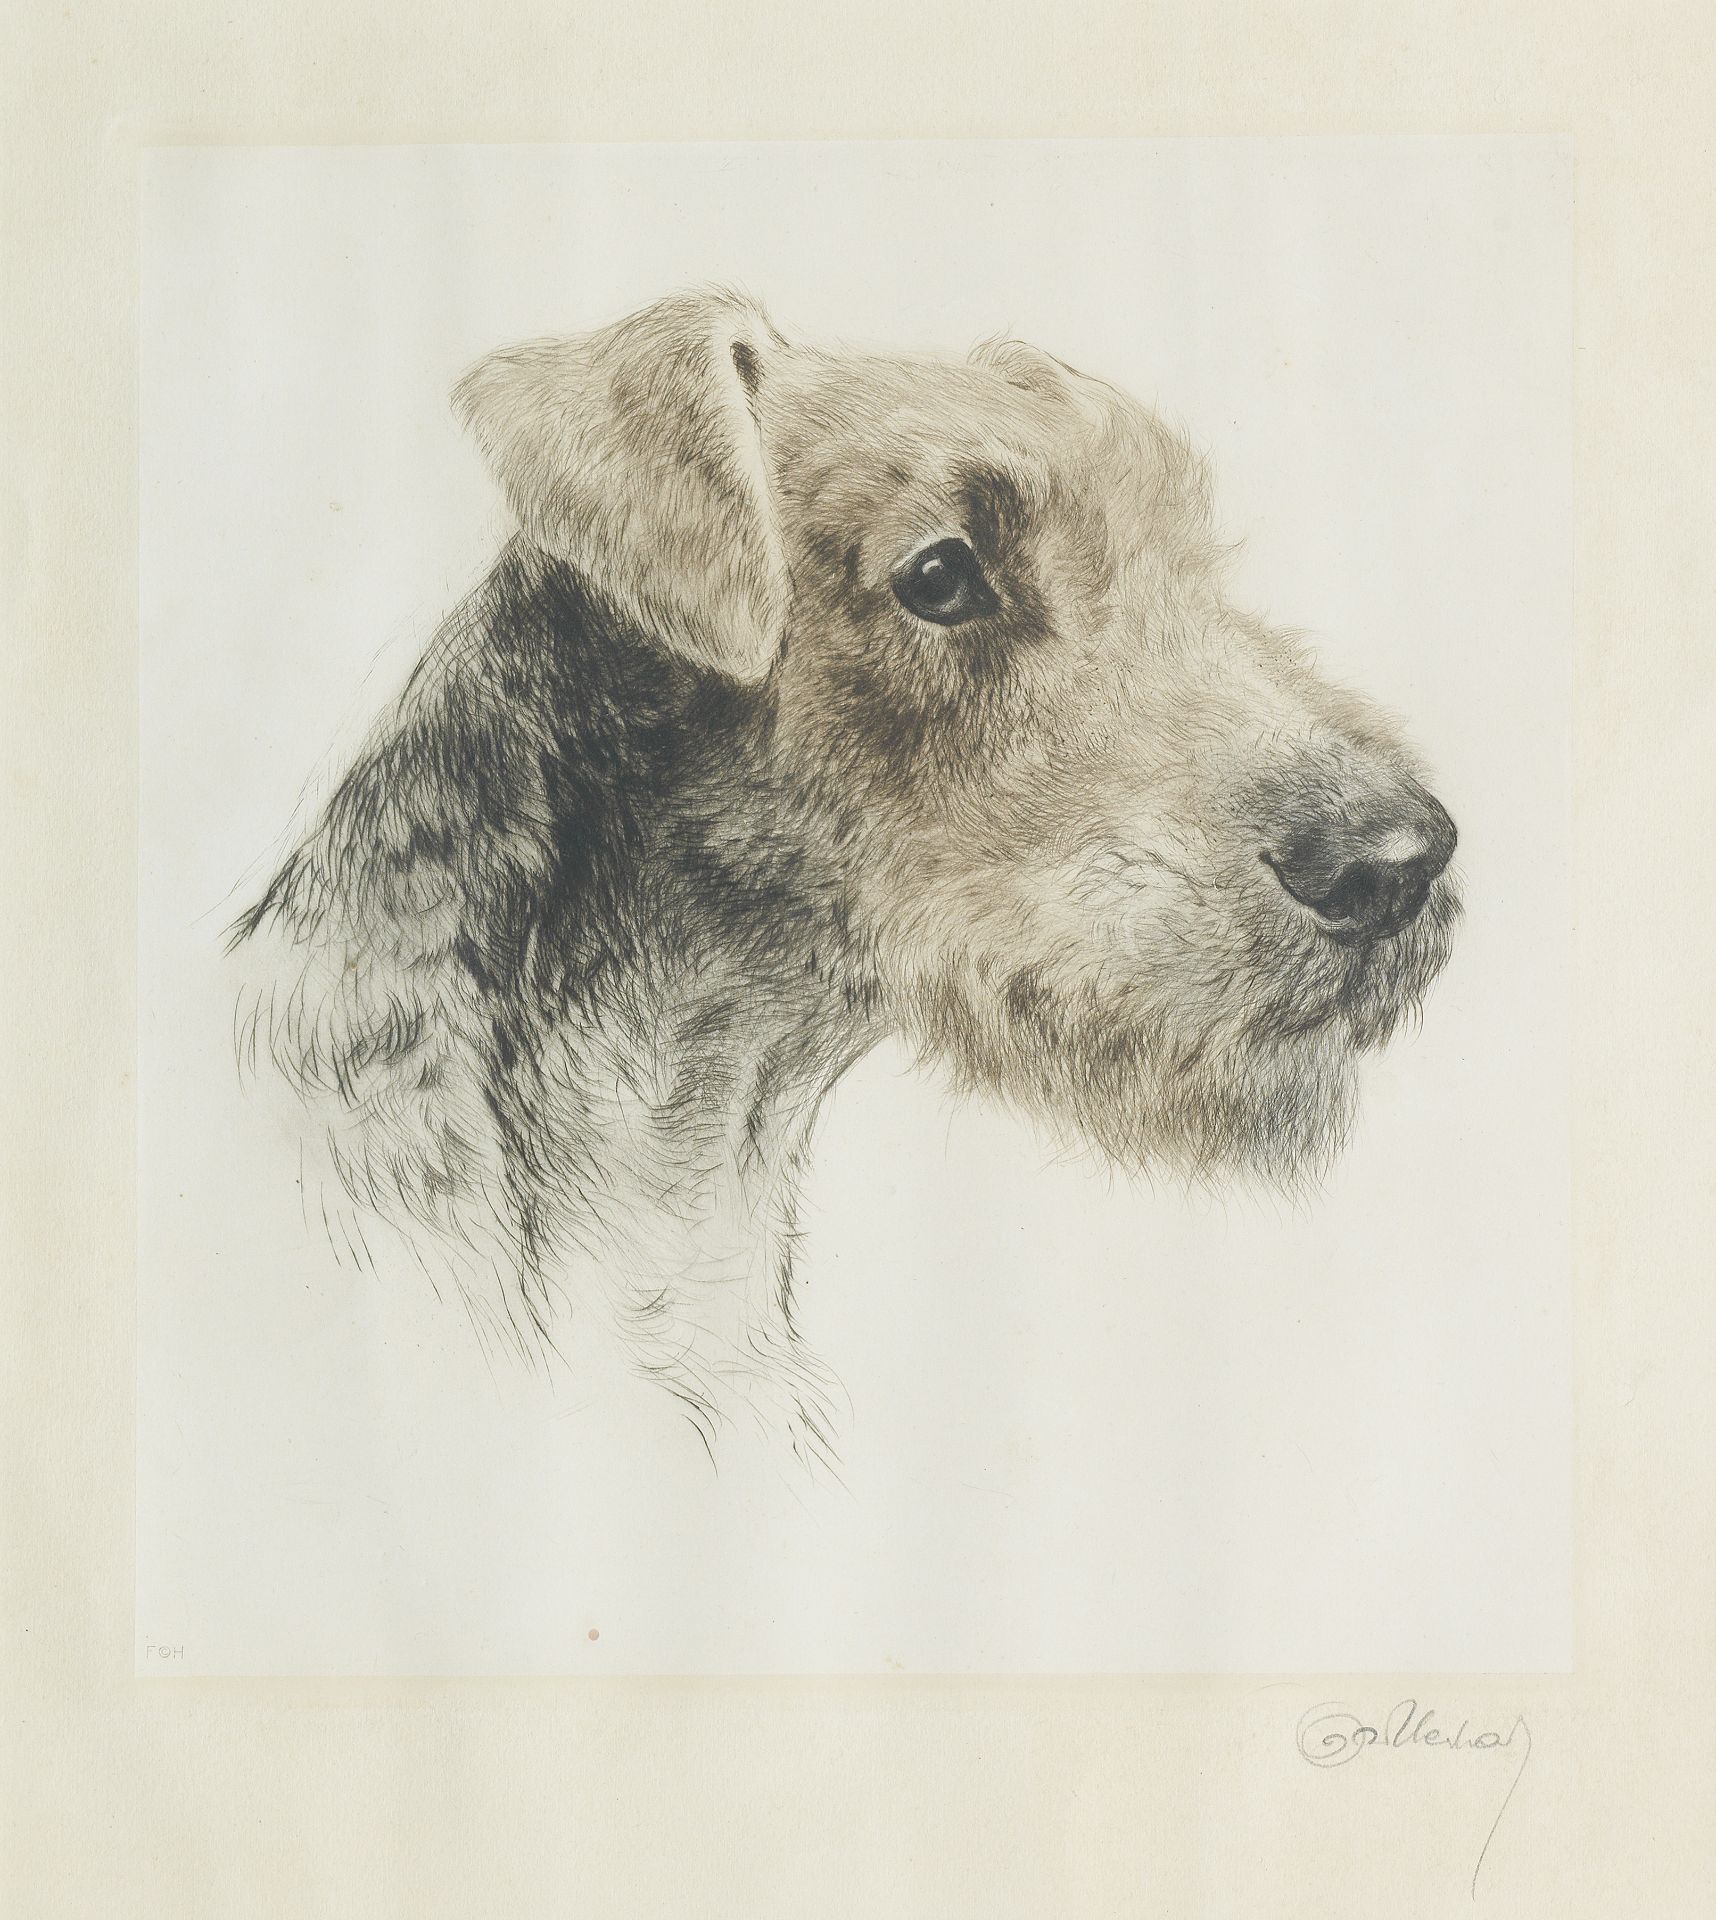 Curt Meyer-Eberhardt (German, 1895-1957) An Airedale Terrier image 28 x 25cm (11 x 9 13/16in).